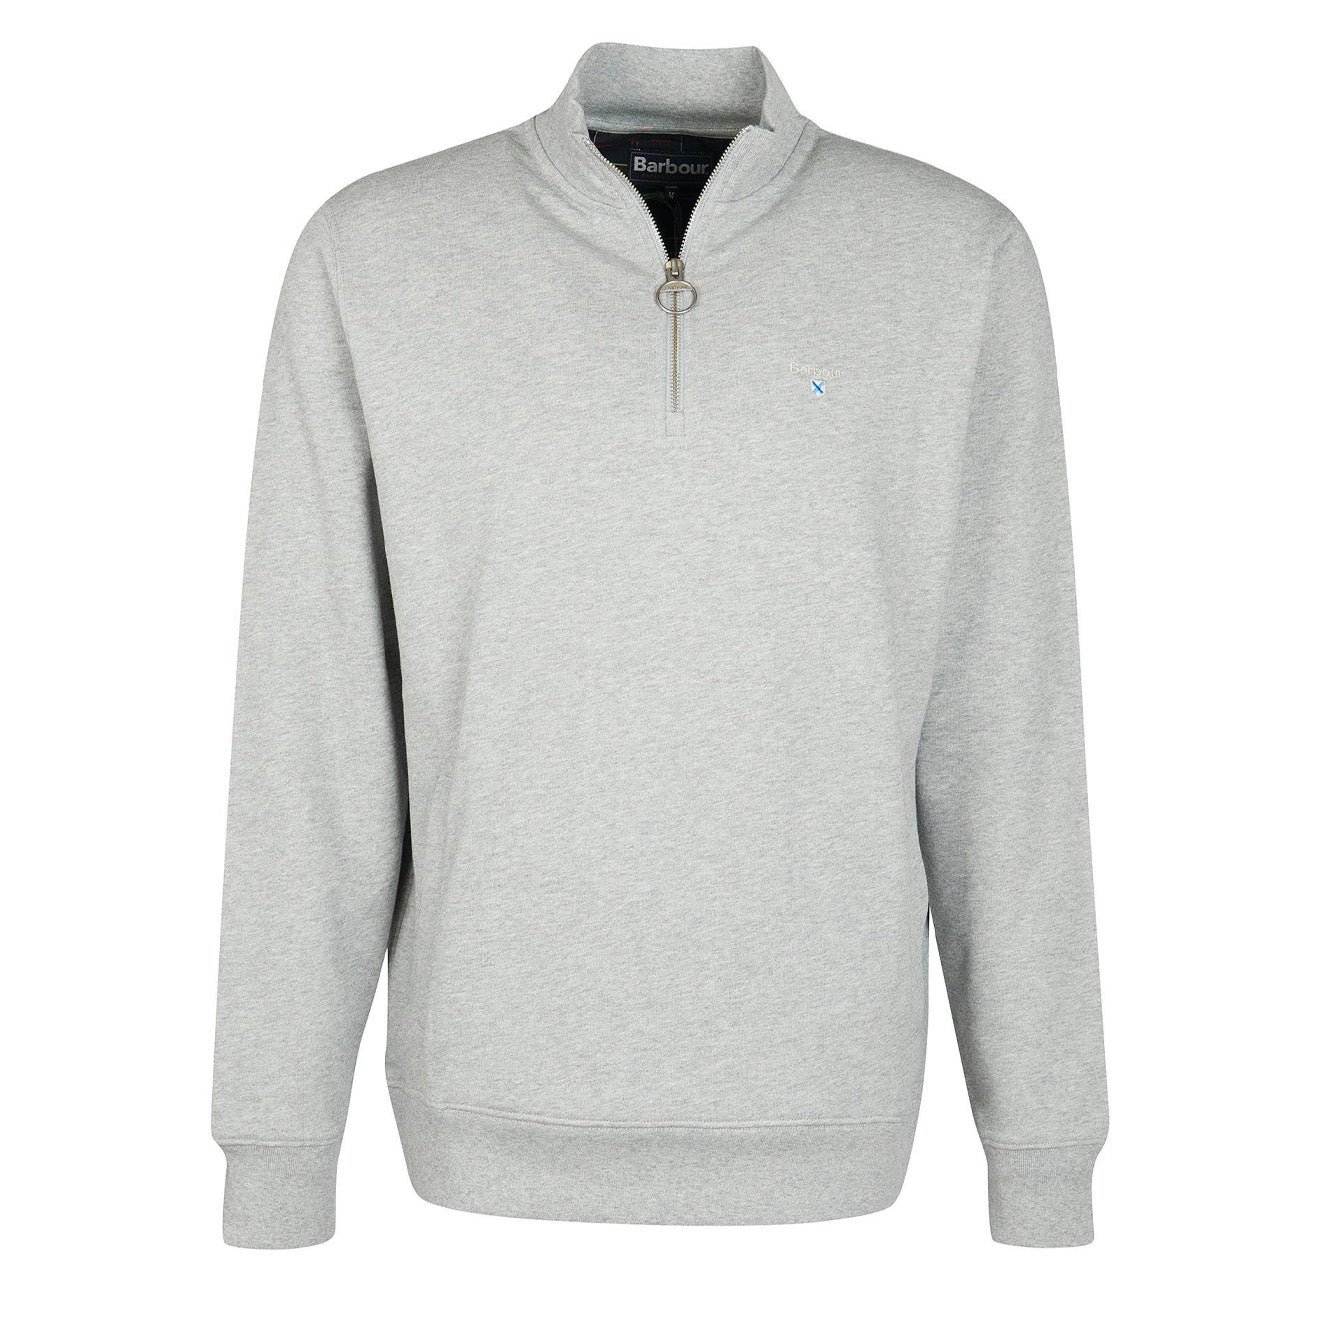 Barbour Rothley Half Zip Knit Grey Marl | The Sporting Lodge